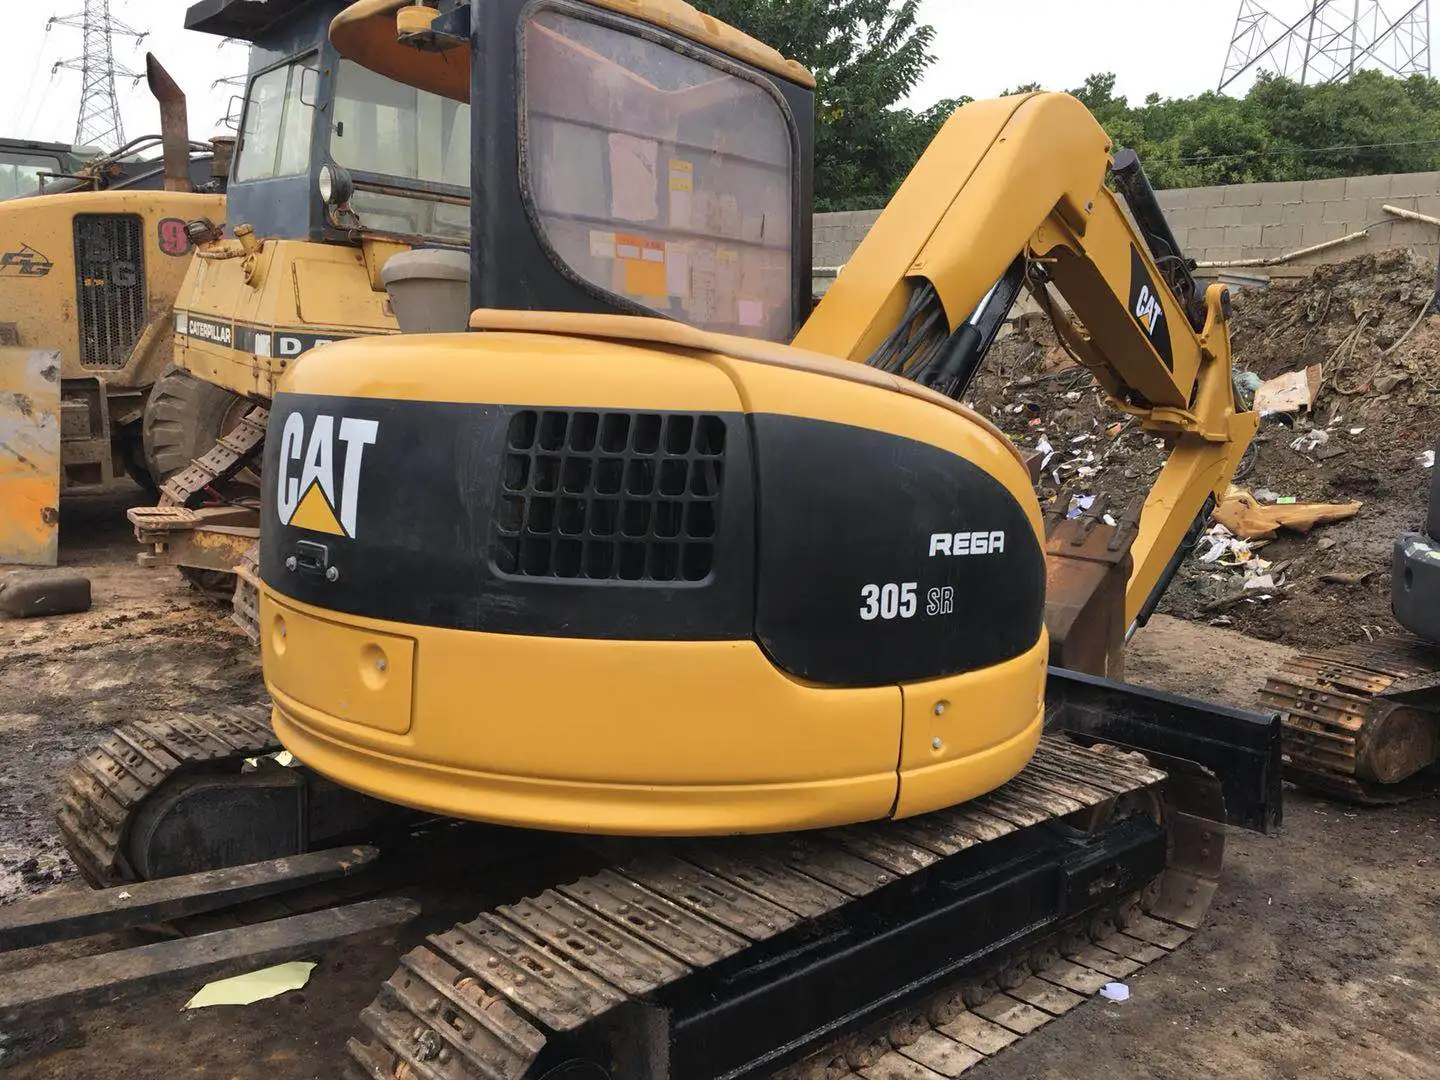 Used Cat 305 Sr With 5 Ton Crawler Excavators In Hot Sale Buy Used Cat 305 Sr Cat 305 Sr 305 Sr With 5 Ton Crawler Excavators Product On Alibaba Com